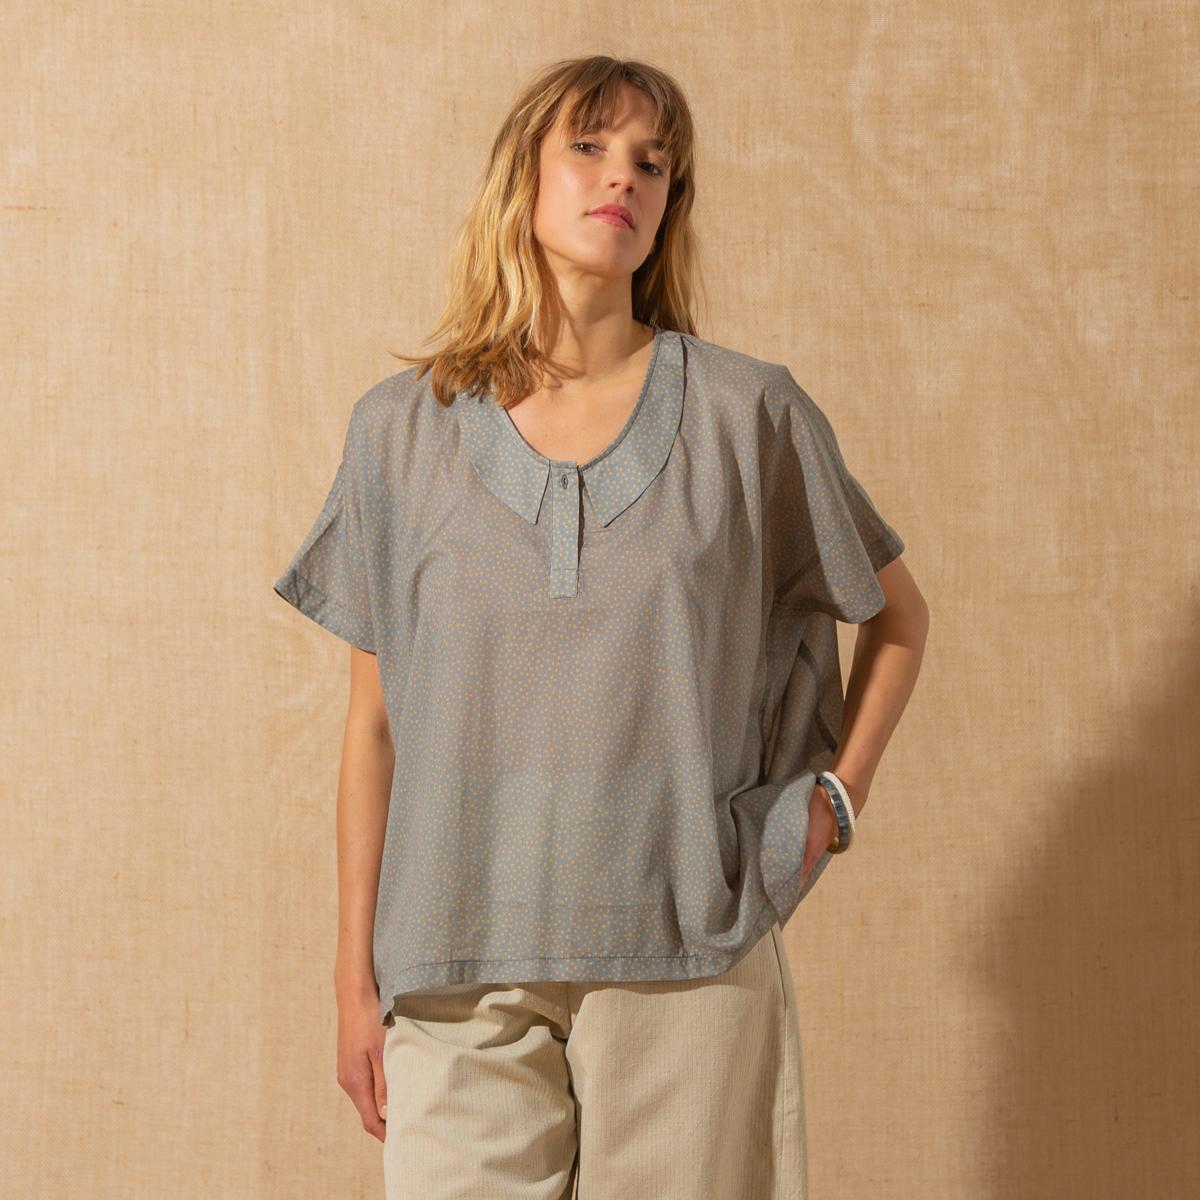 Paola - Lilith Paris is a French brand that has been creating eco-friendly  fashion for women for over 30 years.